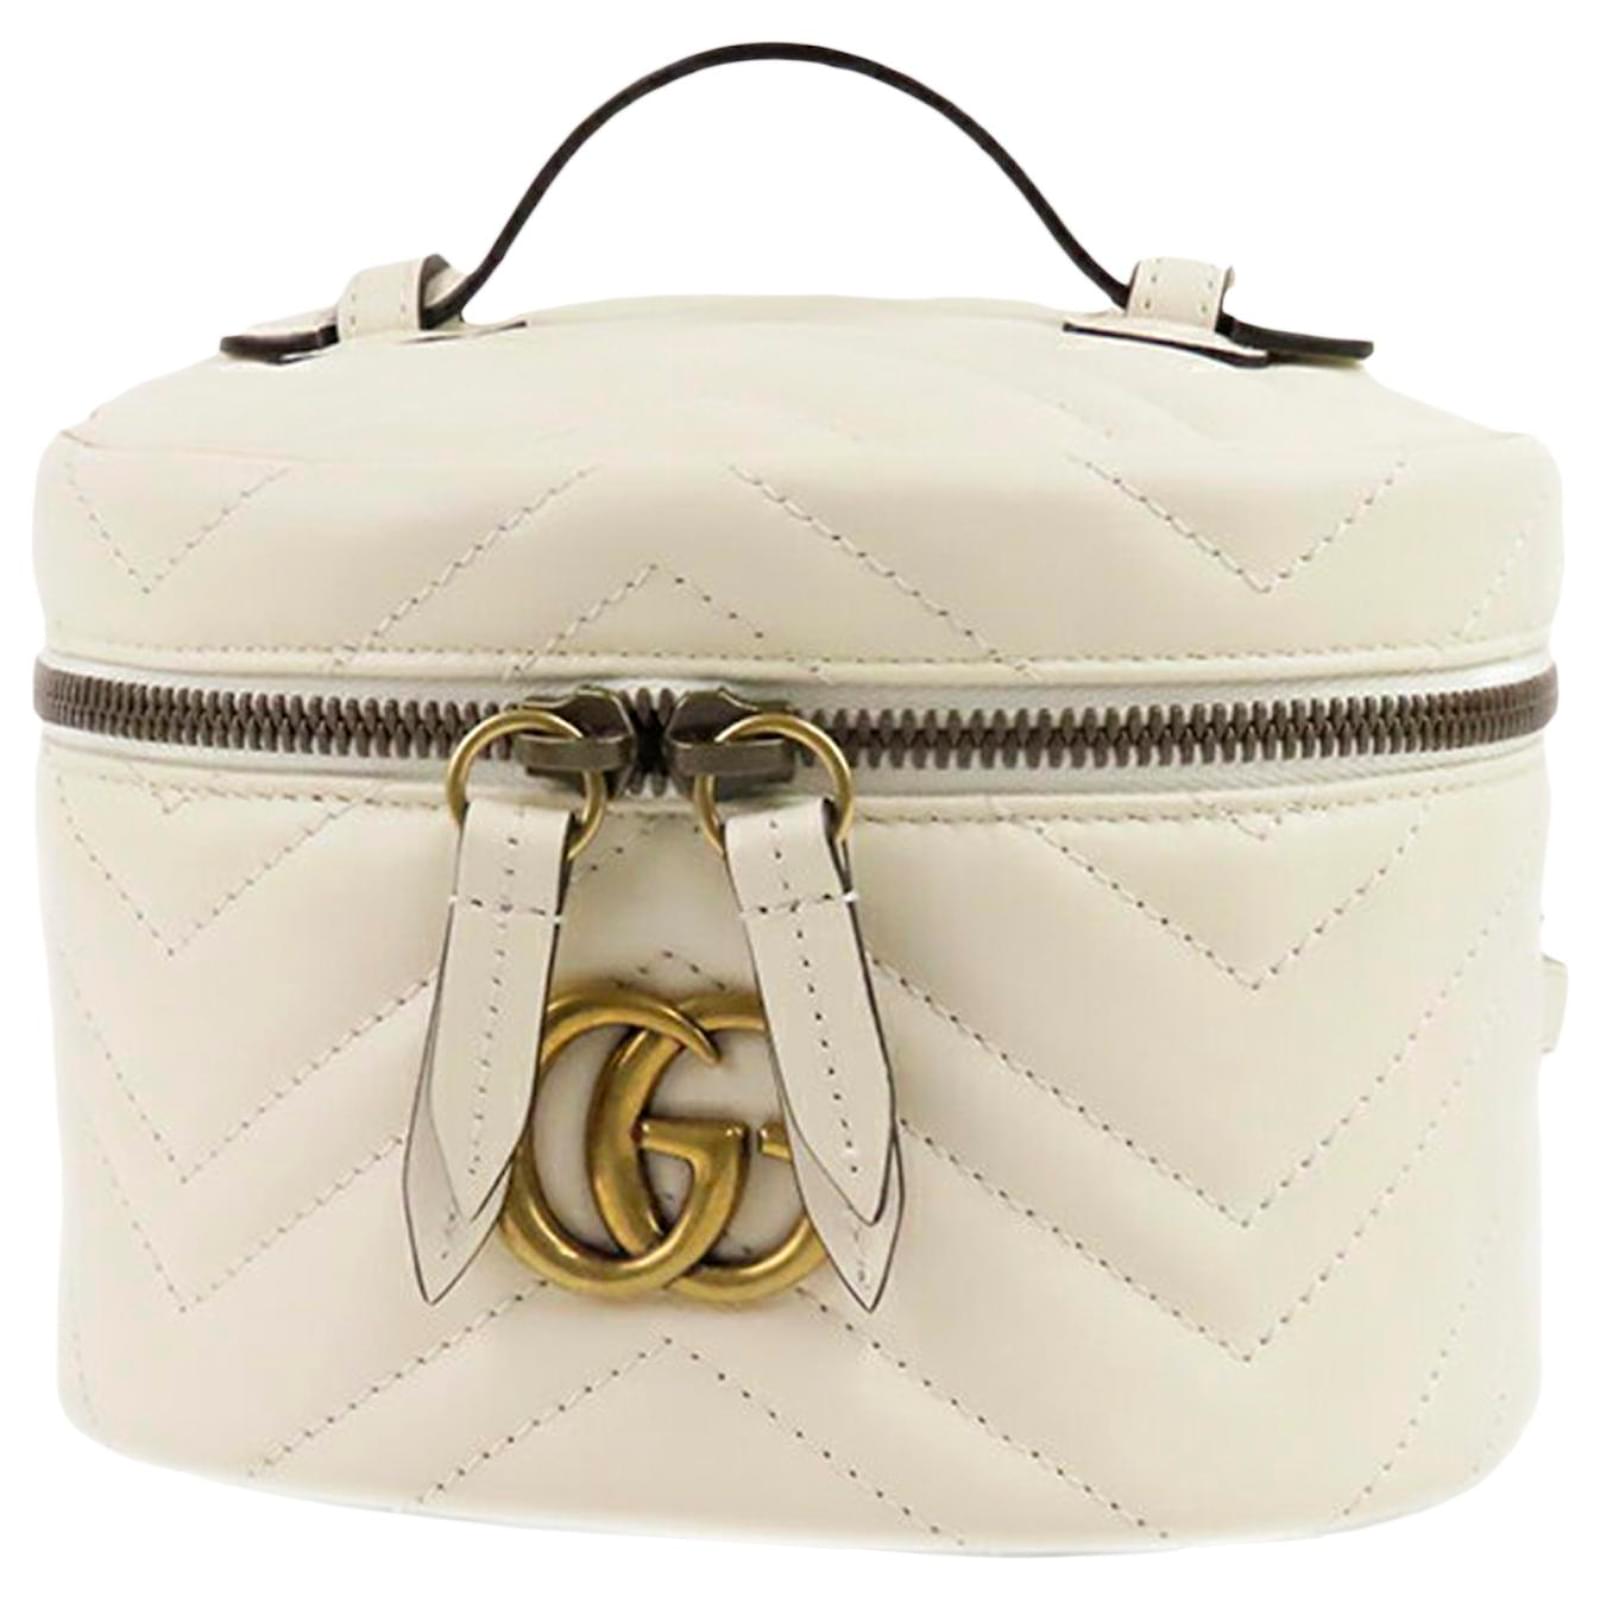 Gucci GG Marmont Small Backpack in White